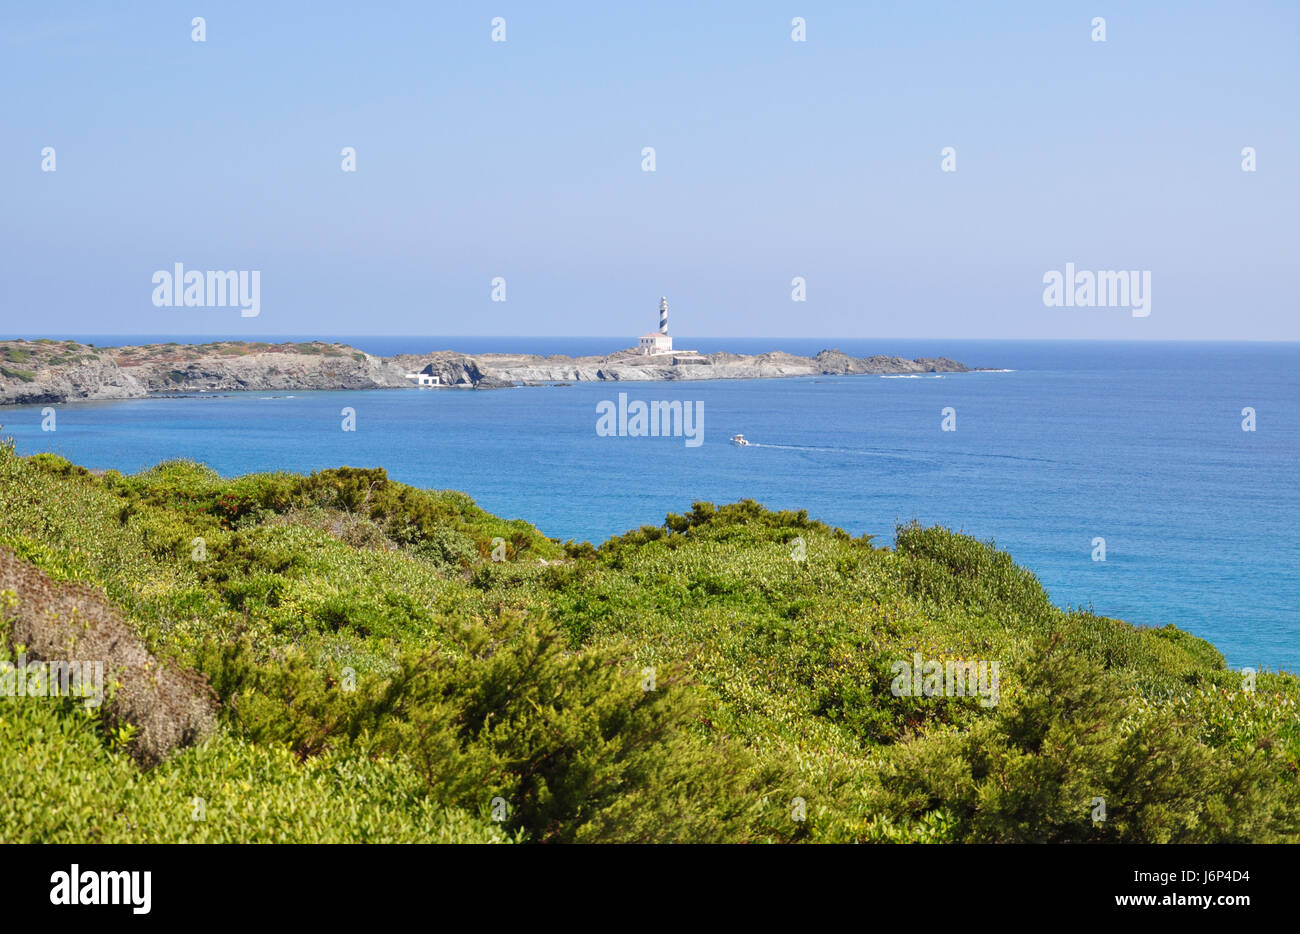 Tortuga beach, harbor and lighthouse view on Menorca Balearic island in Spain Stock Photo